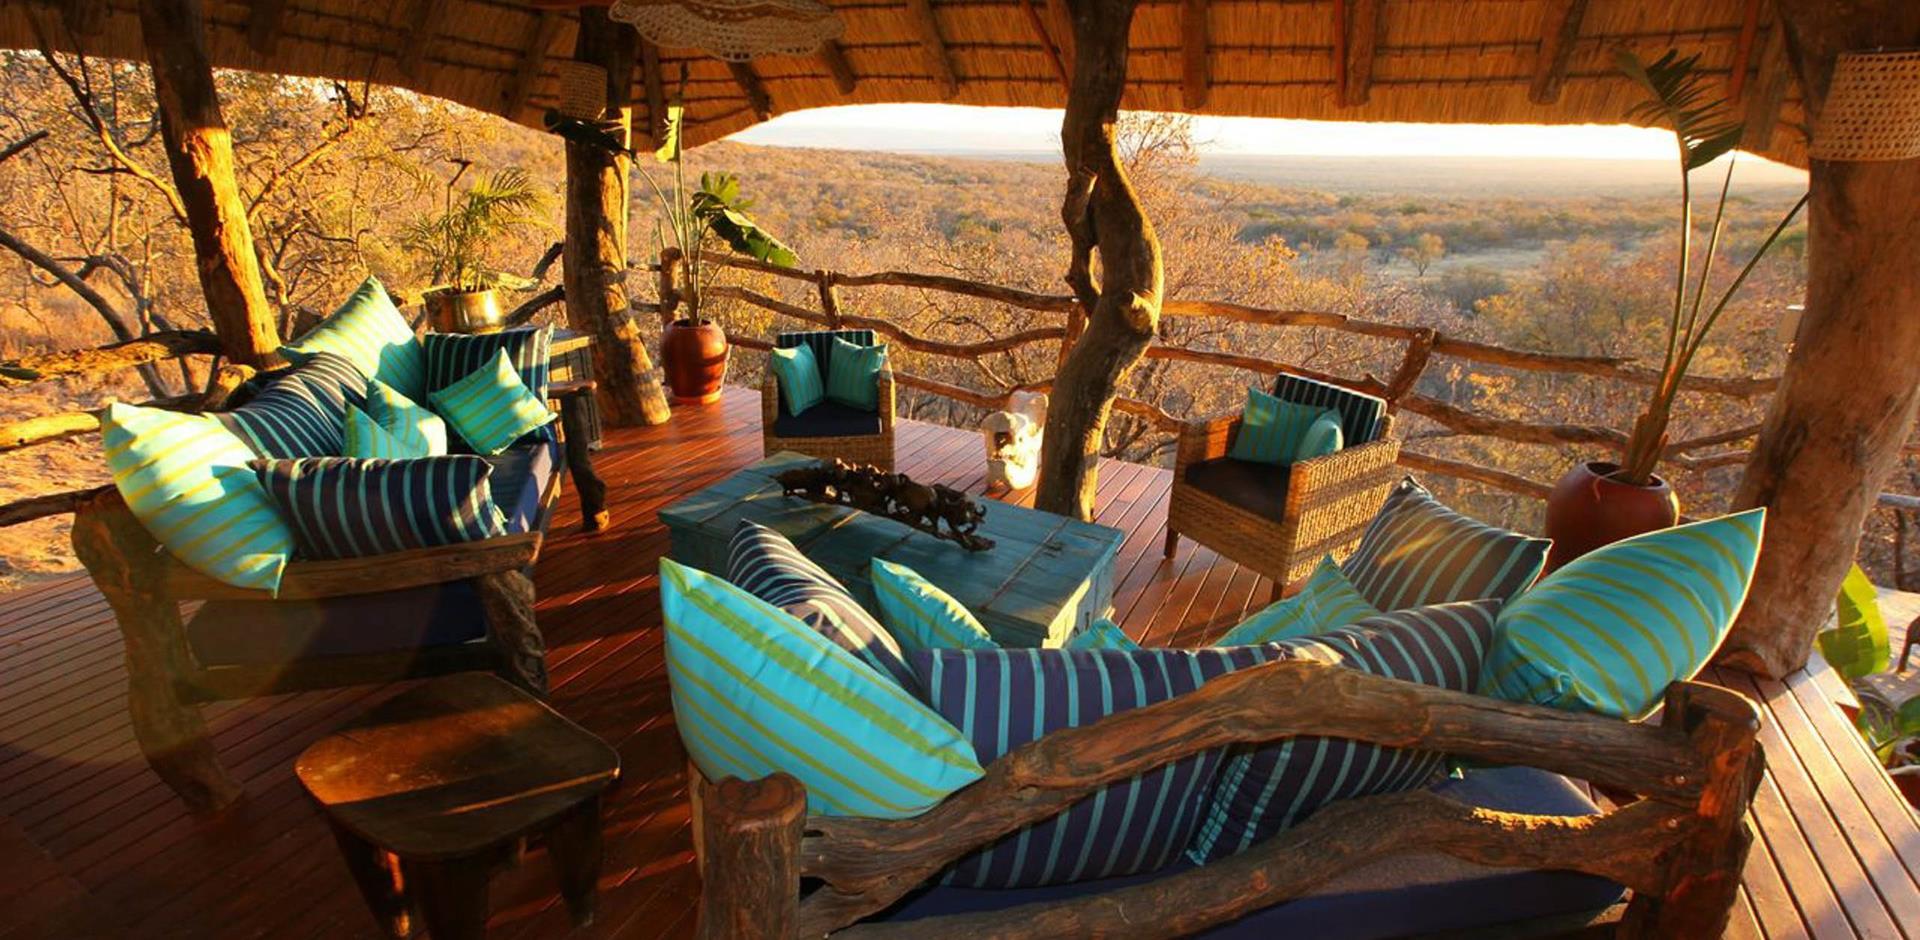 Seating, Ant's Hill, South Africa, A&K